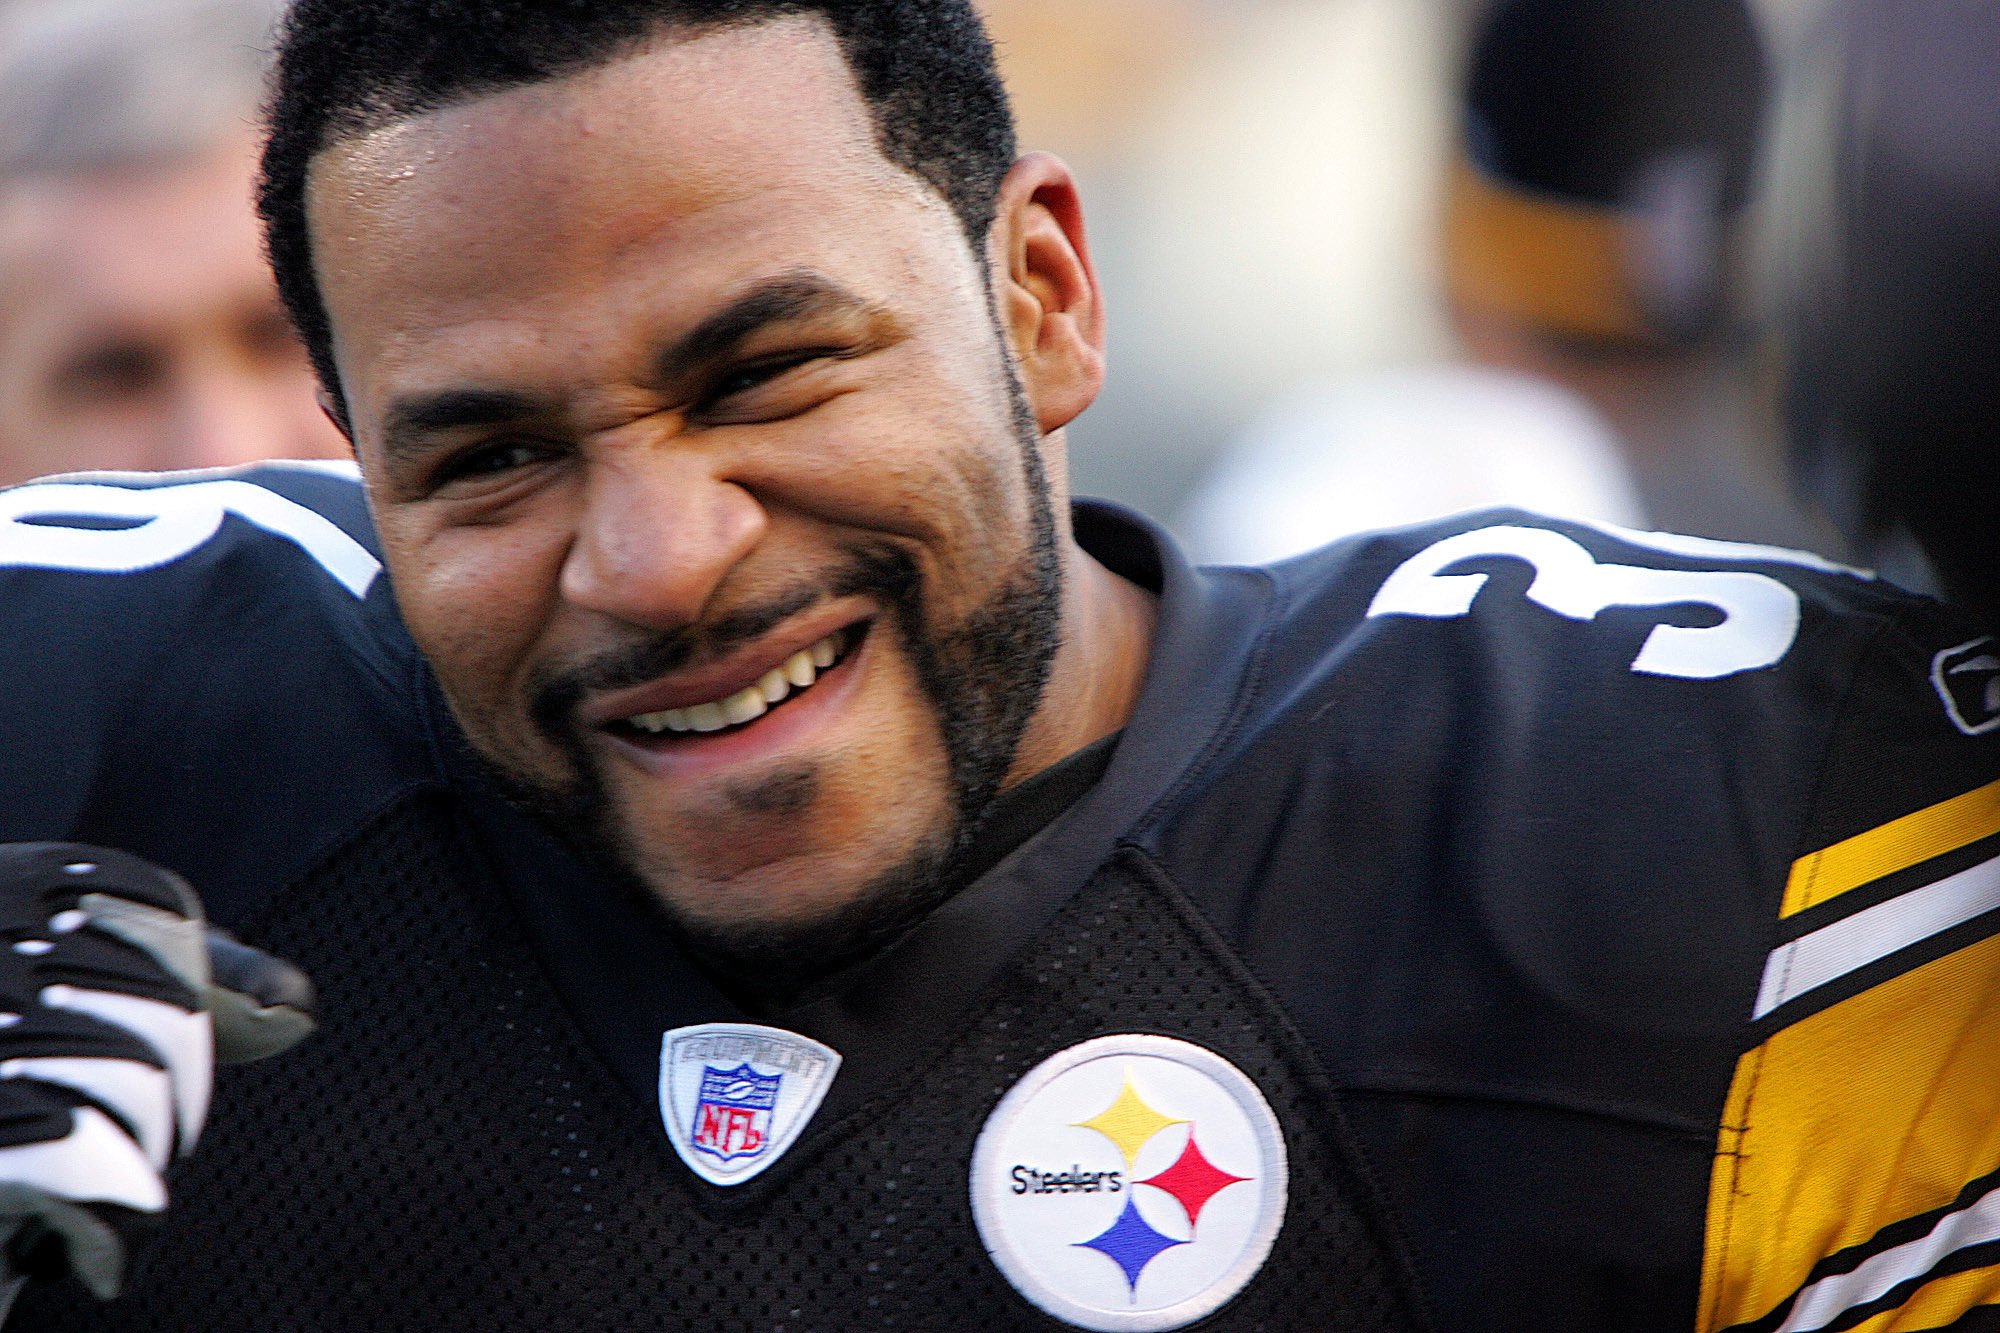 Happy Birthday Jerome Bettis aka the bus. One of the best nfl running backs of all time. 